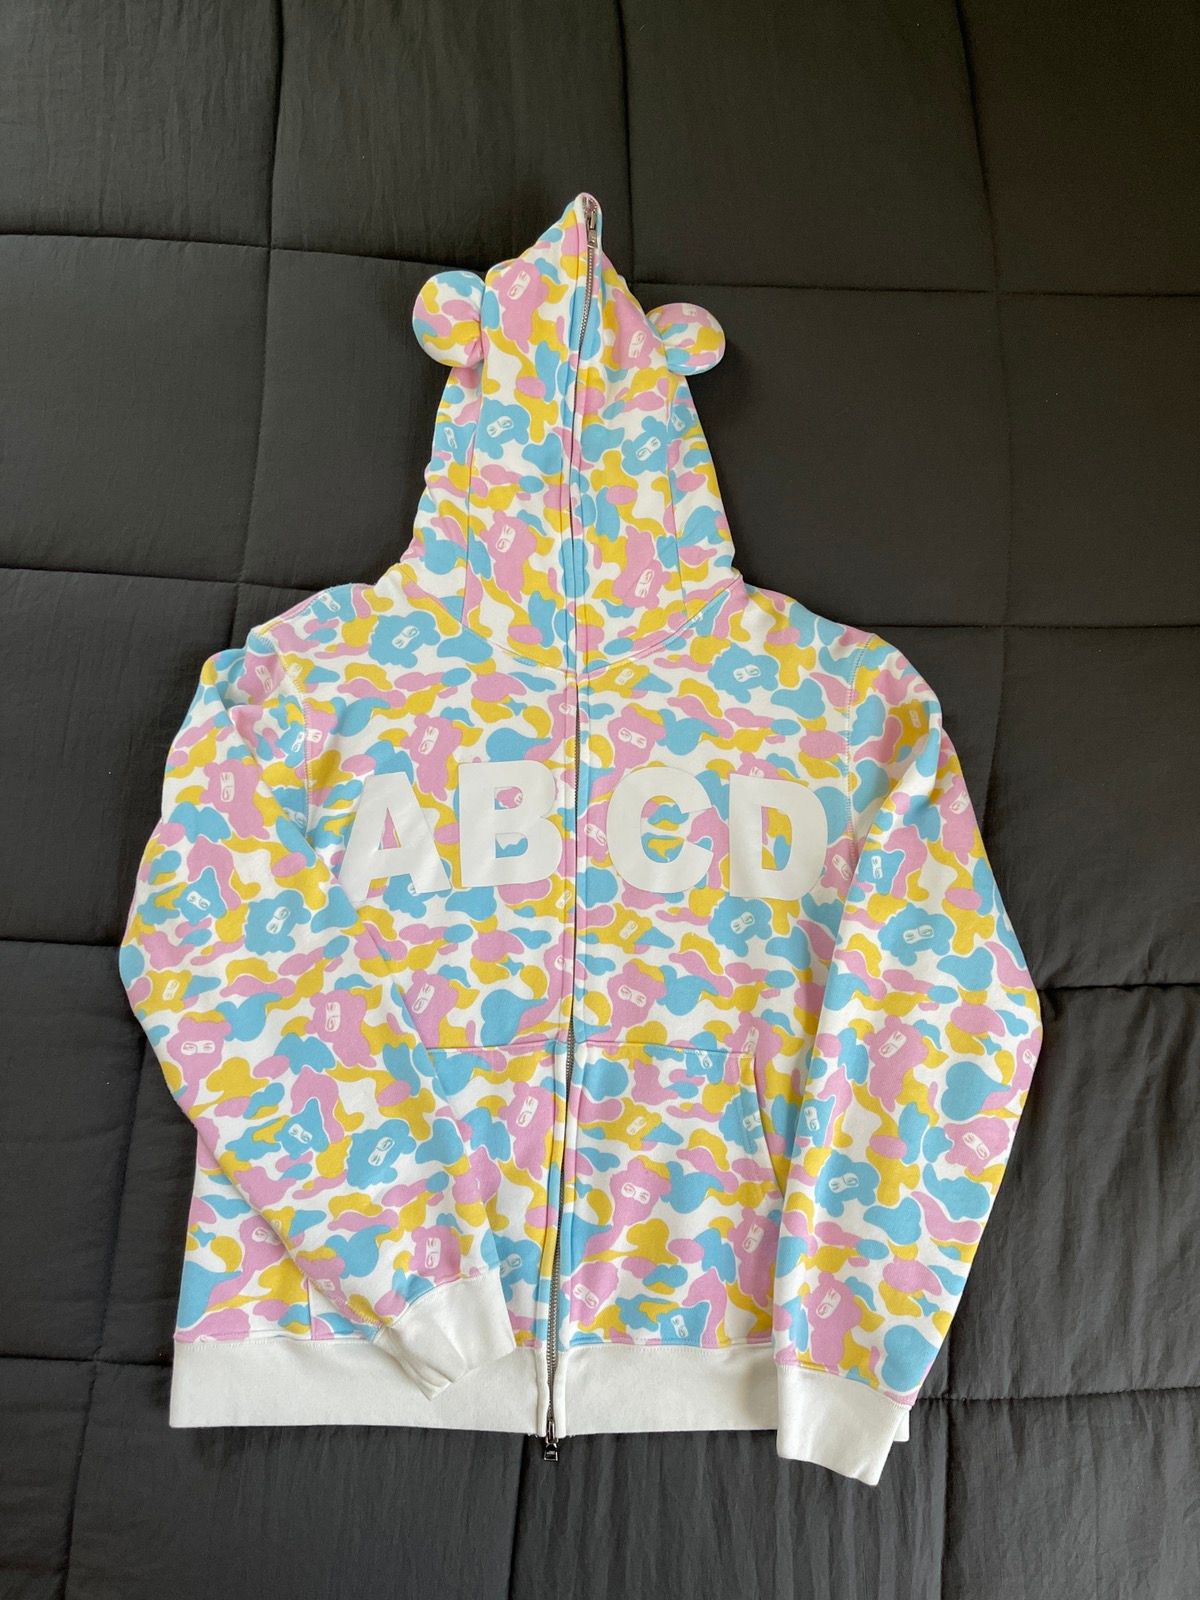 Japanese Brand Jose Wong ABCD Cotton Candy Full Zip Hoodie Size US M / EU 48-50 / 2 - 1 Preview